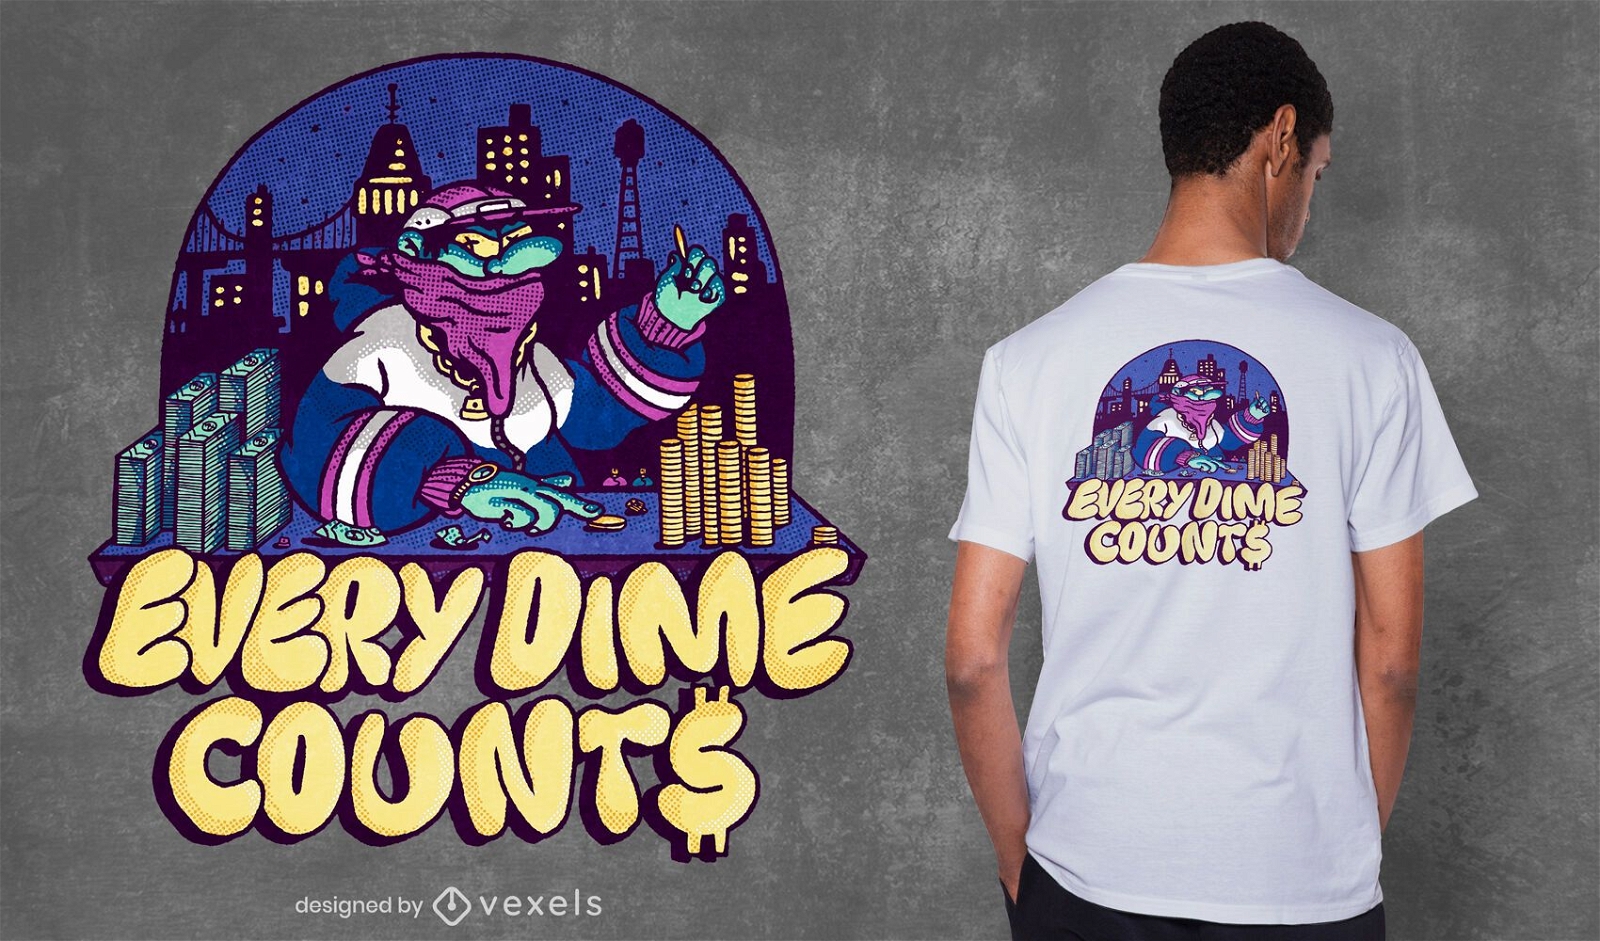 Every dime counts t-shirt design